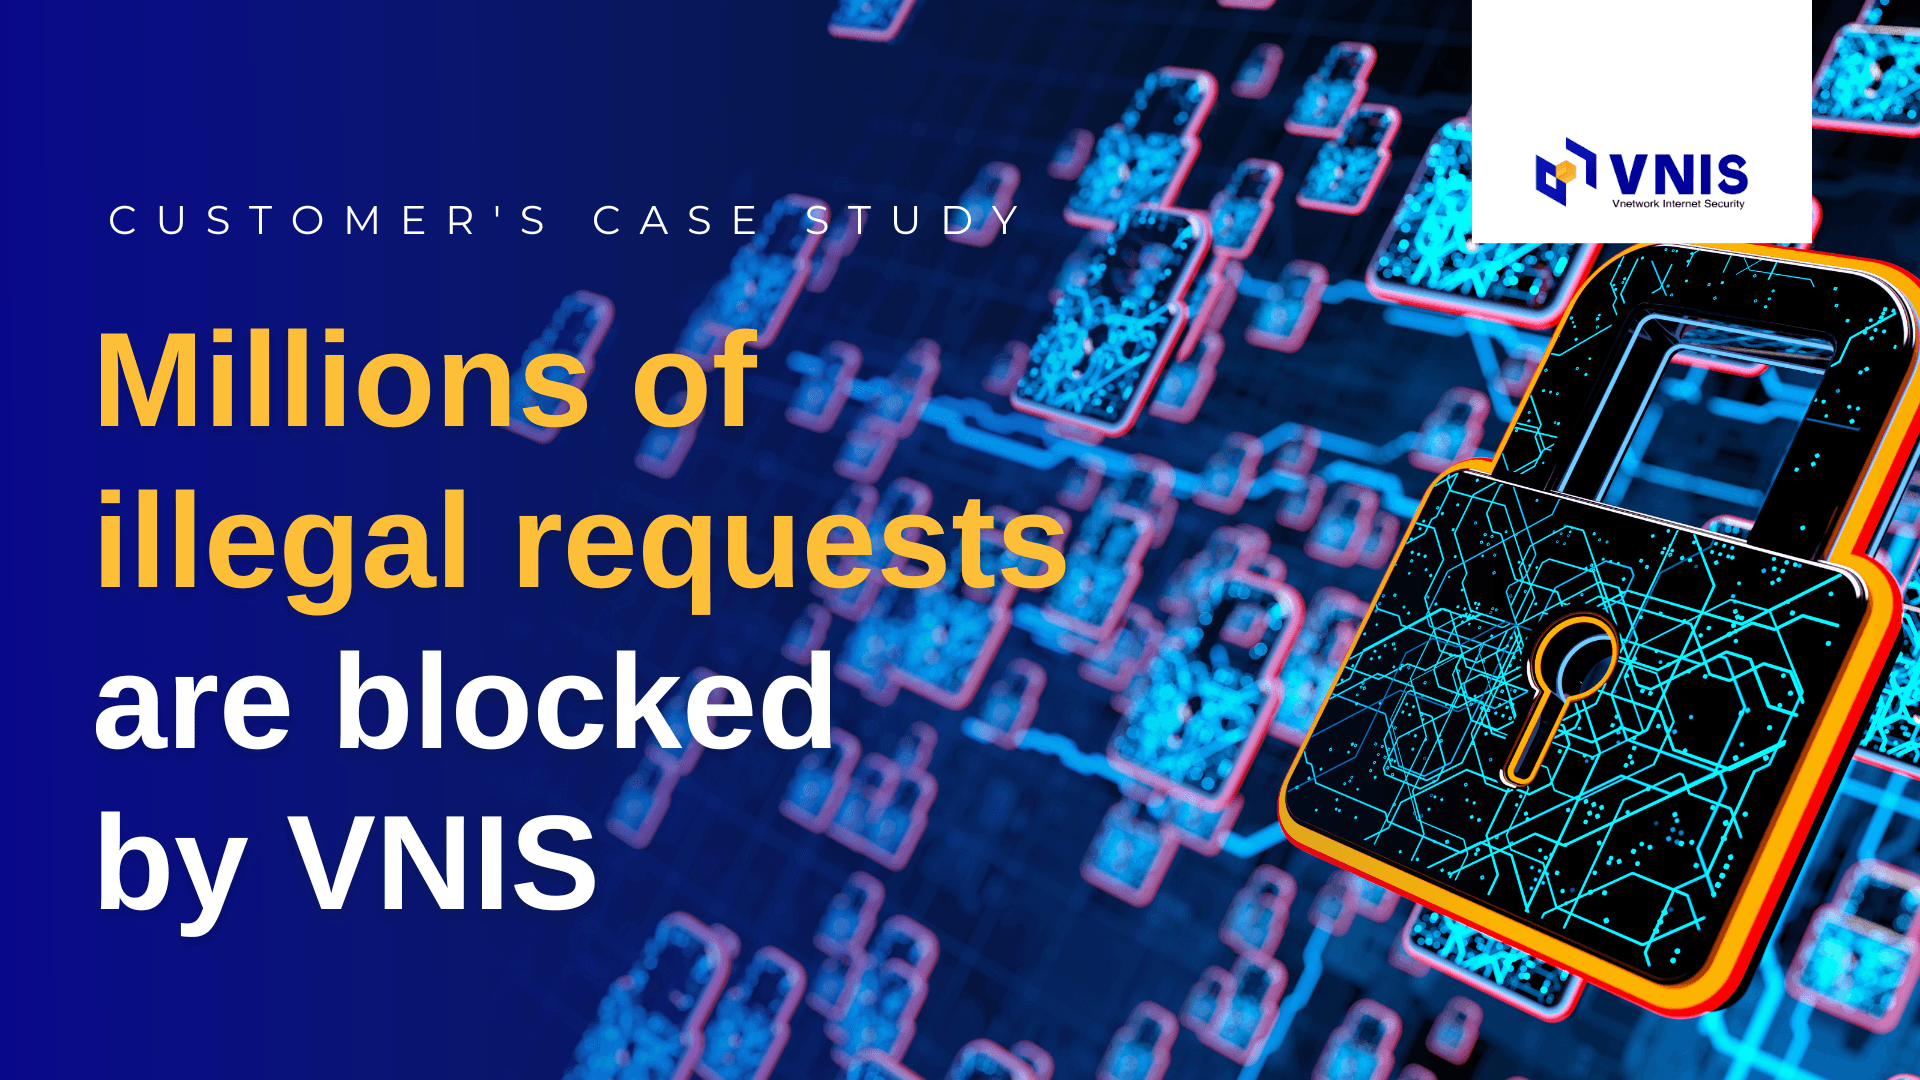 VNIS secures the Website and helps customers fight and prevent millions illegal requests